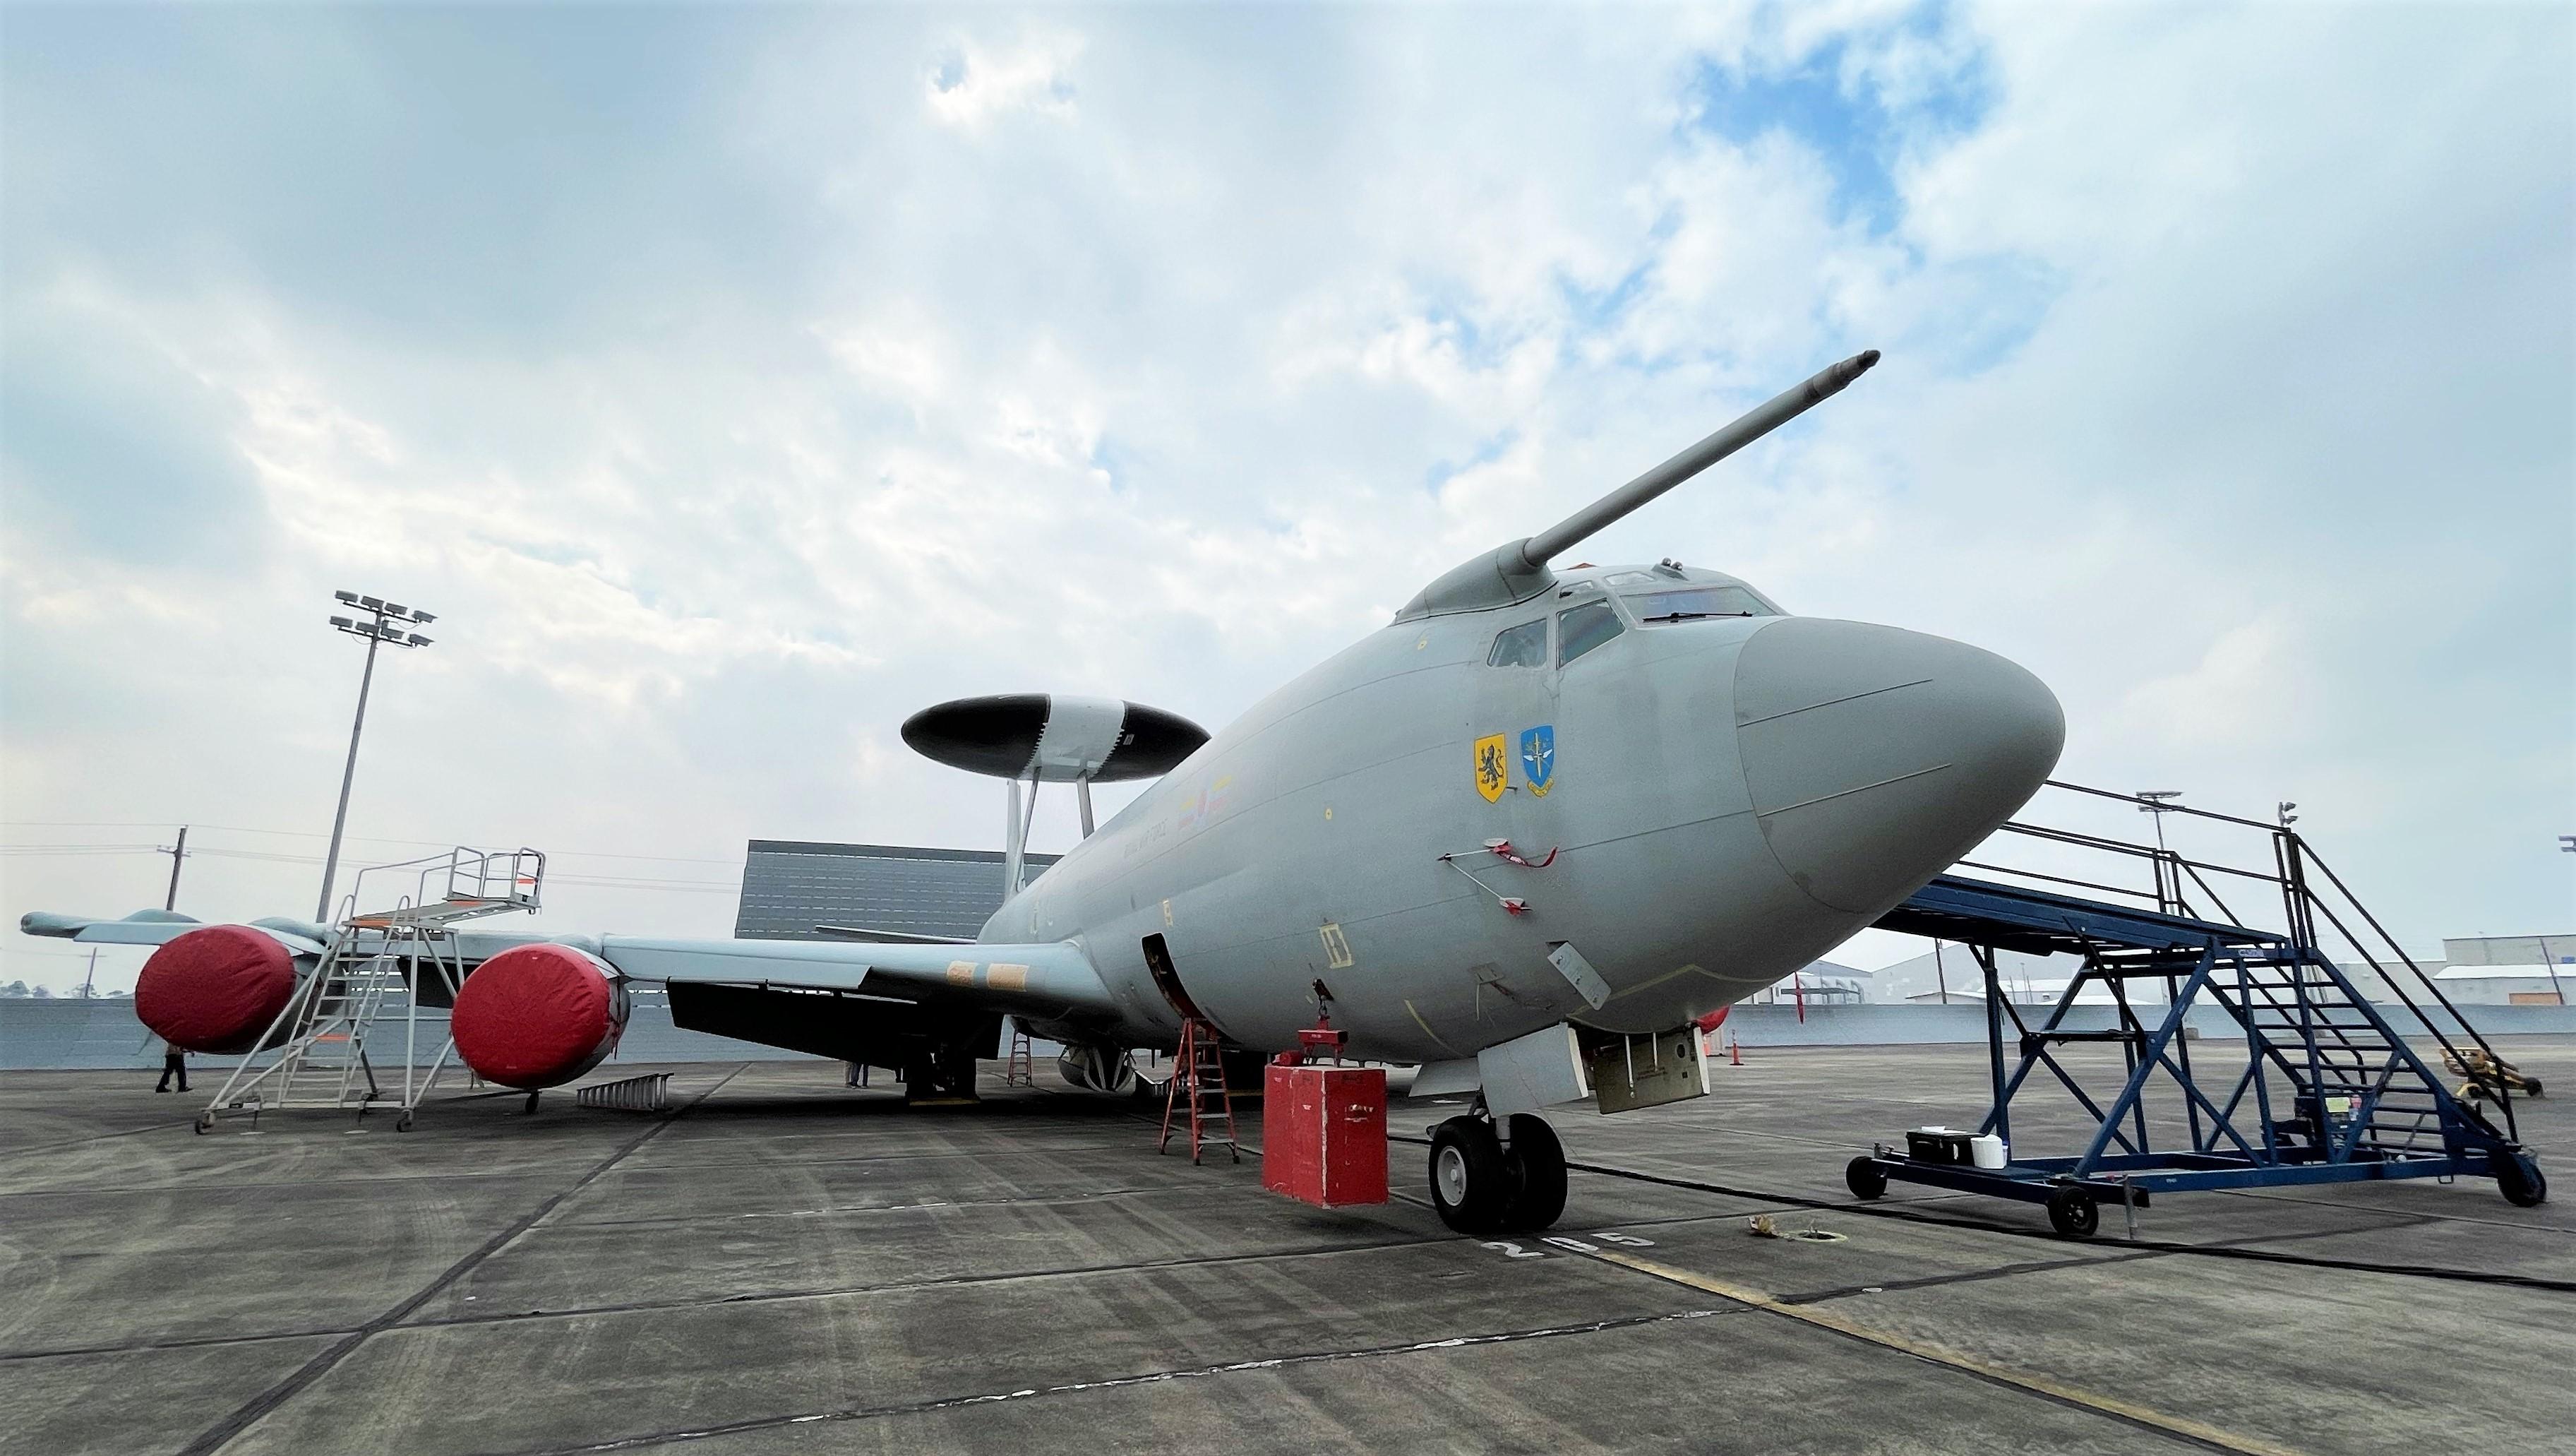 PMA-271 works quickly to purchase E-6B trainer aircraft | NAVAIR